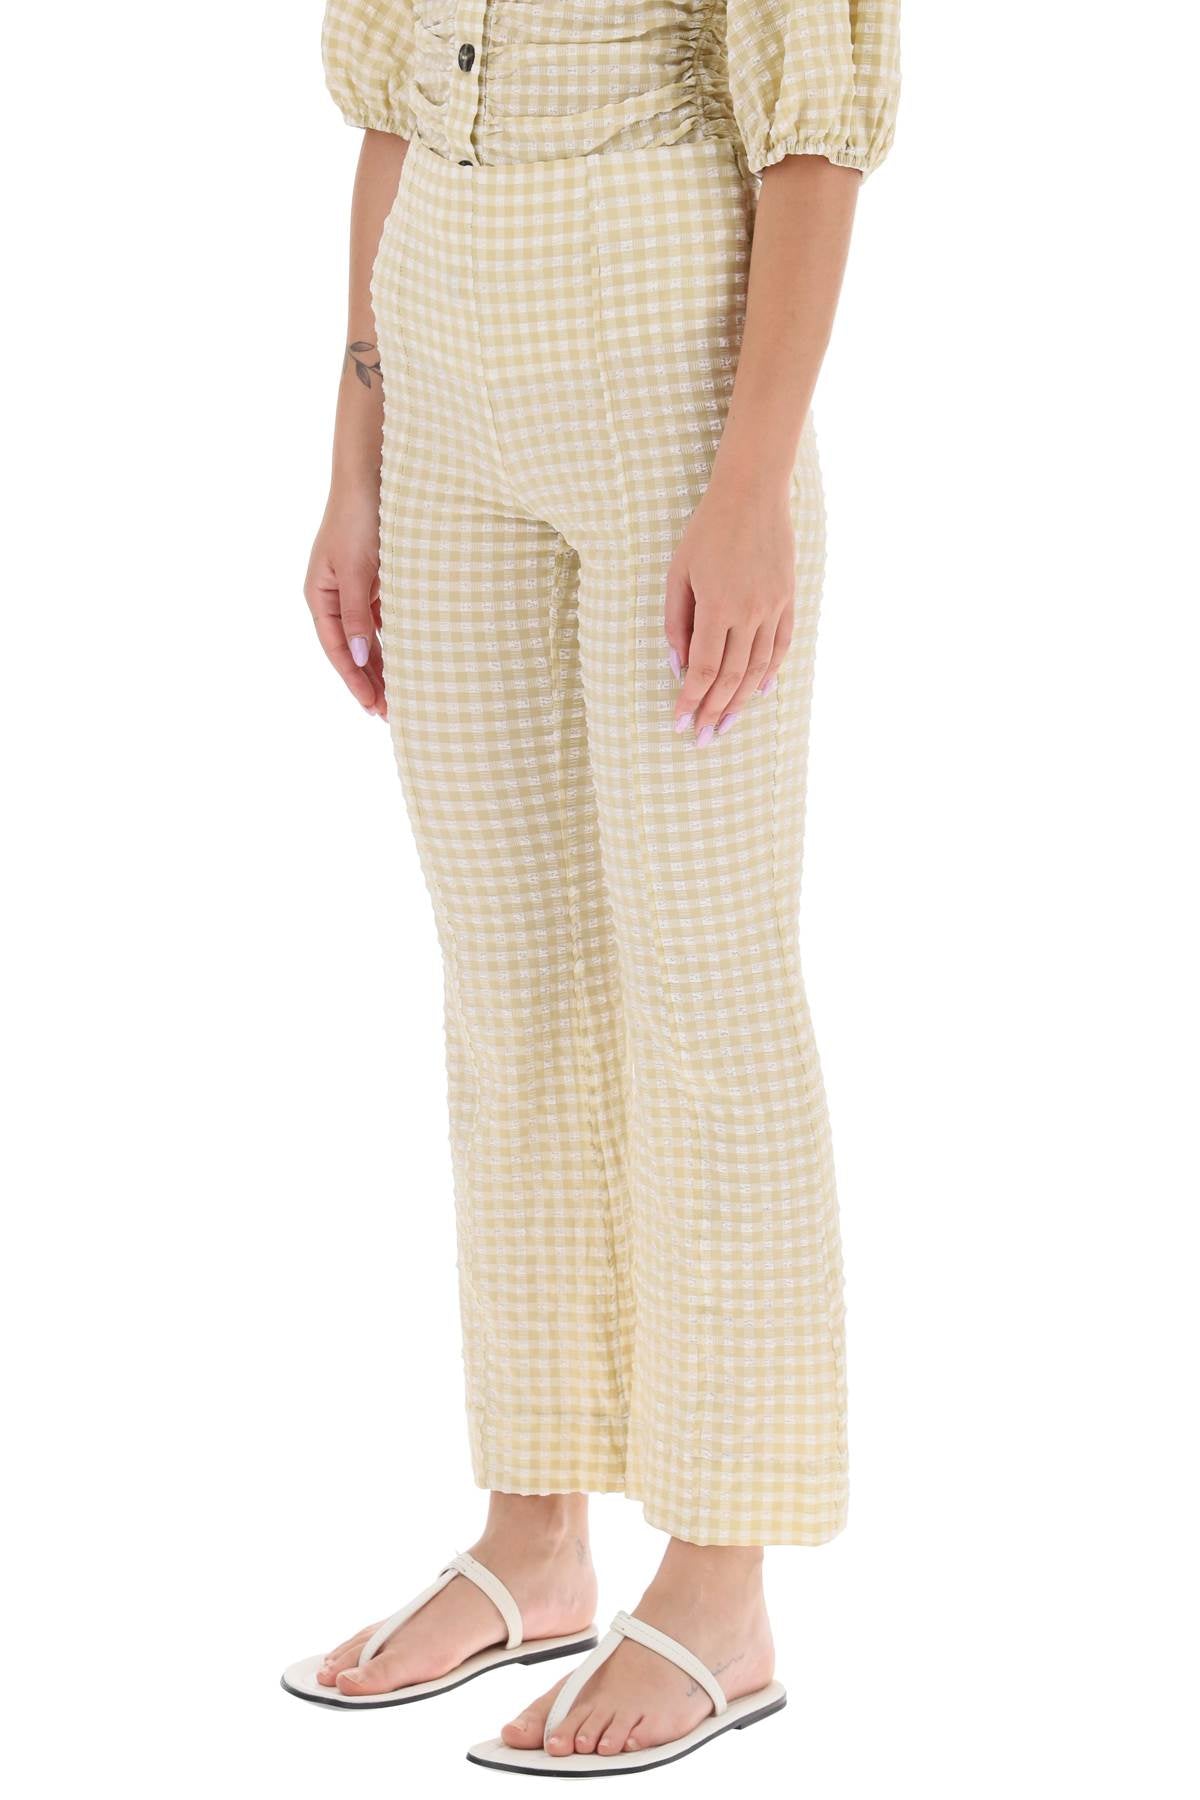 Ganni flared pants with gingham motif-3